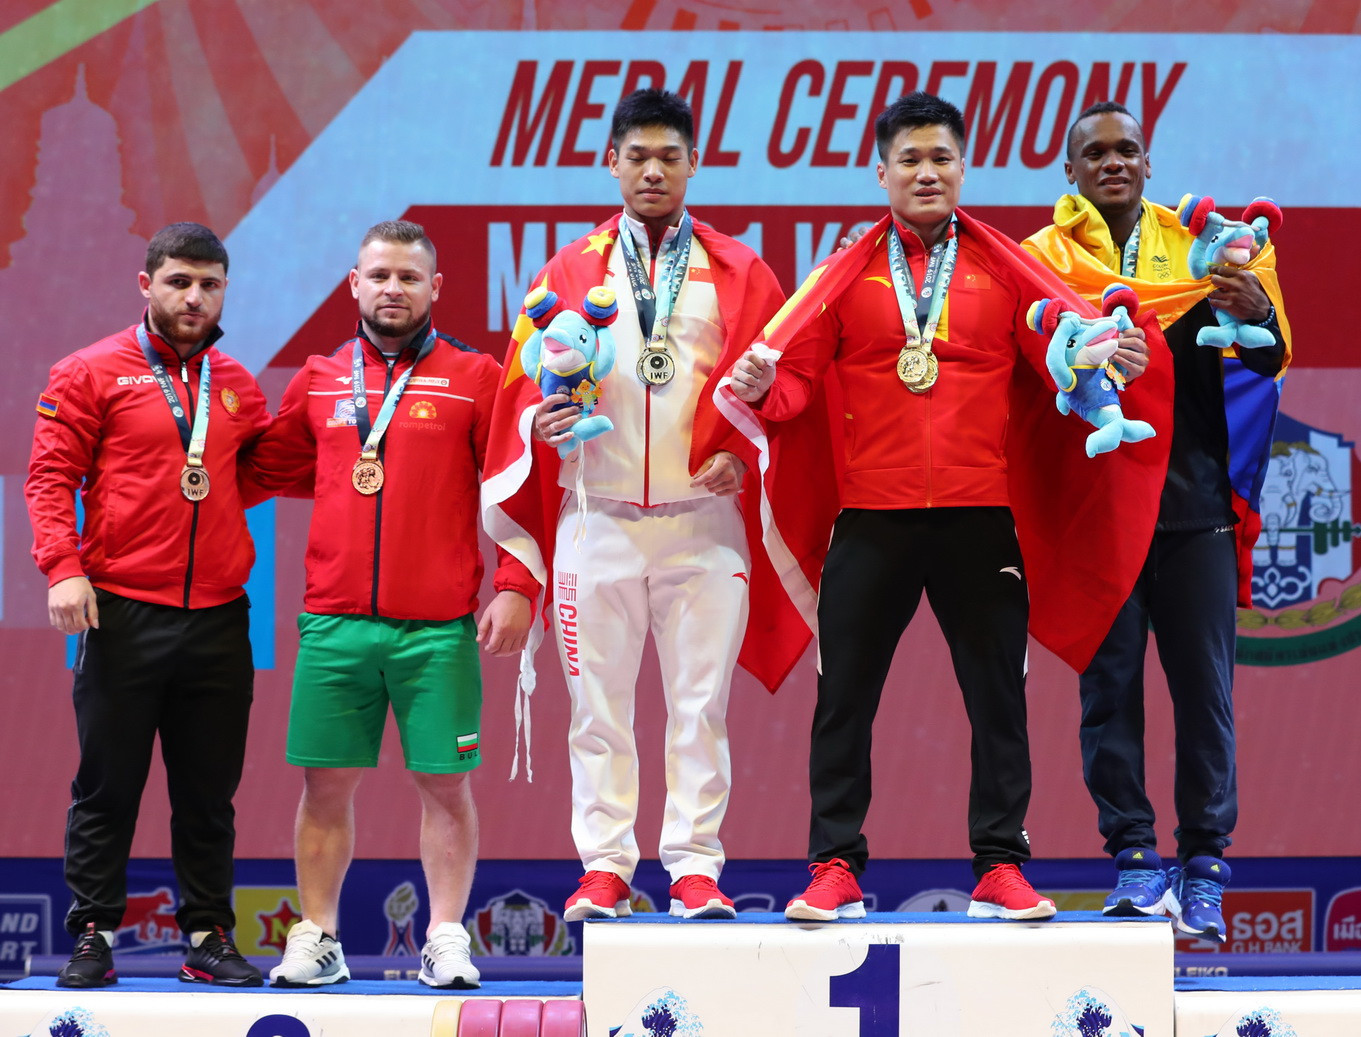 The trio were joined on the podium by Armenia's Andranik Karapetyan and Bulgaria's Yunder Nedim Beytula, the bronze medallists in the snatch and clean and jerk, respectively ©IWF